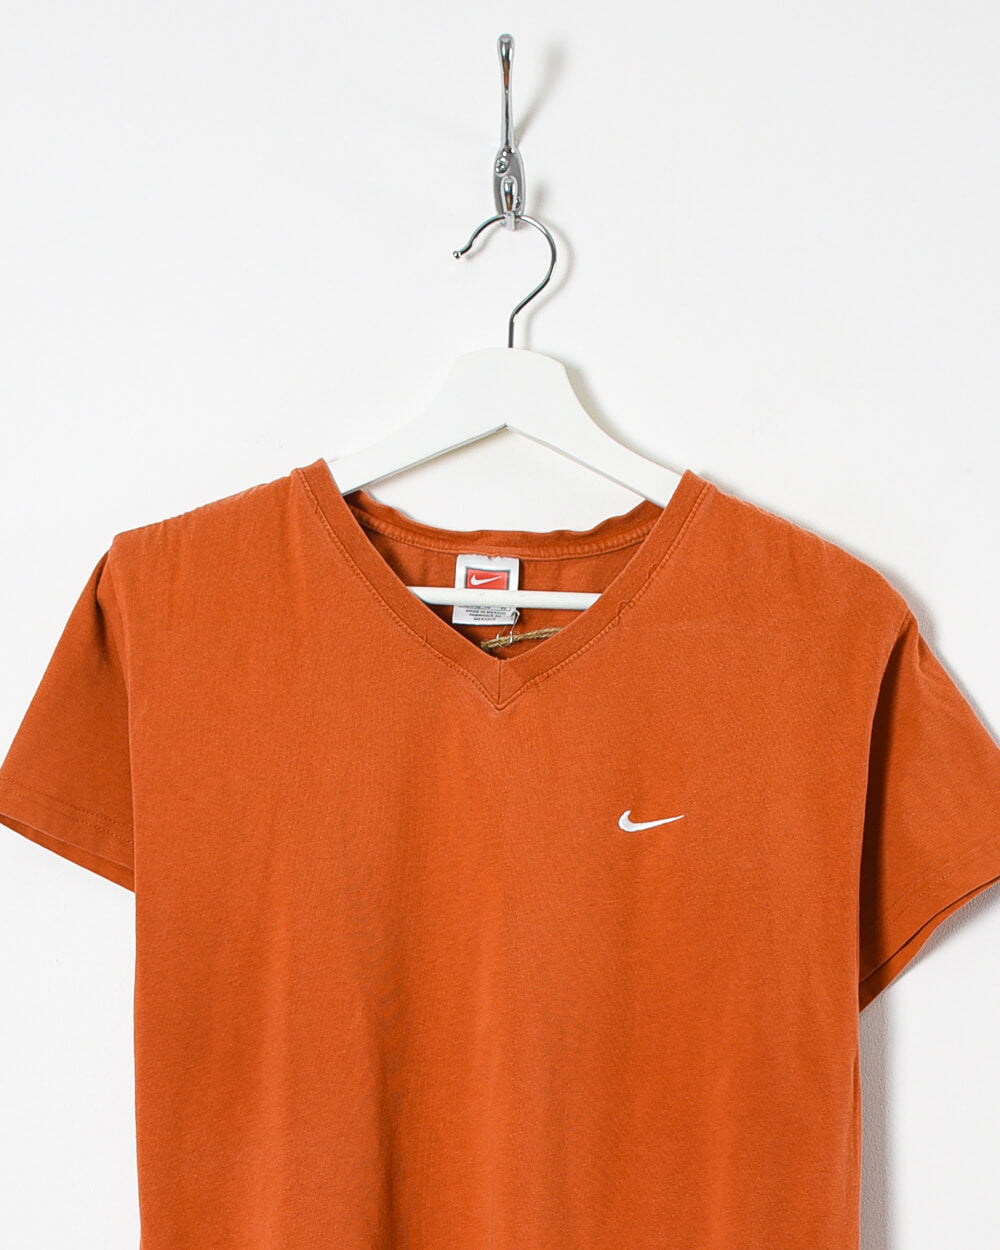 Nike Women's T-Shirt - X-Large - Domno Vintage 90s, 80s, 00s Retro and Vintage Clothing 